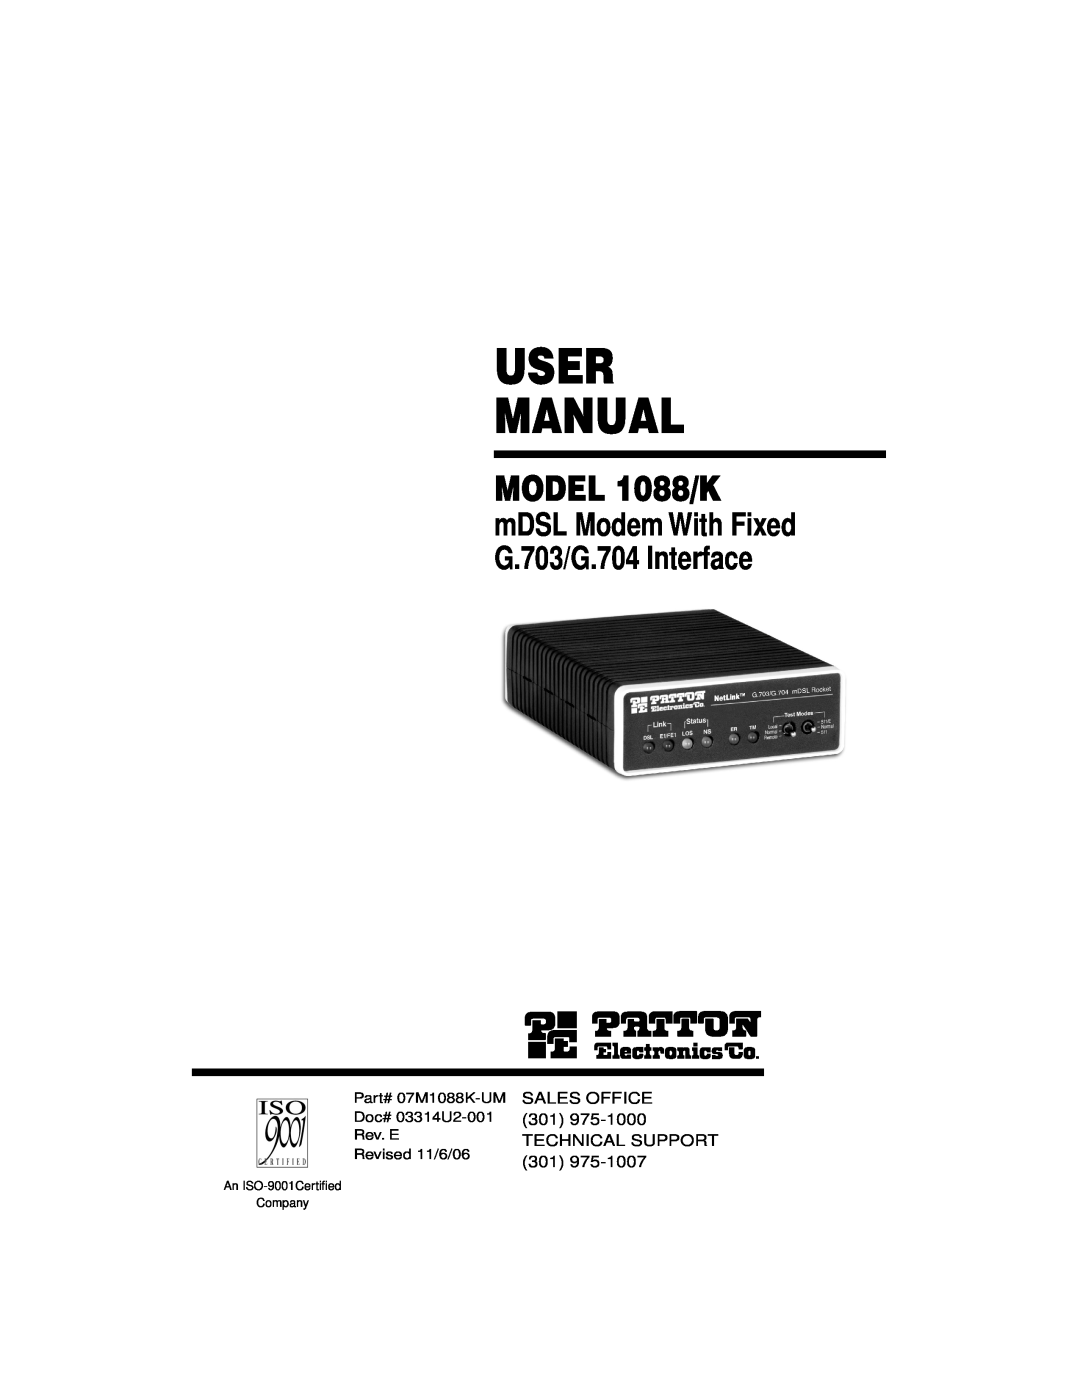 Patton electronic user manual MODEL 1088/K, mDSL Modem With Fixed G.703/G.704 Interface, An ISO-9001Certiﬁed Company 